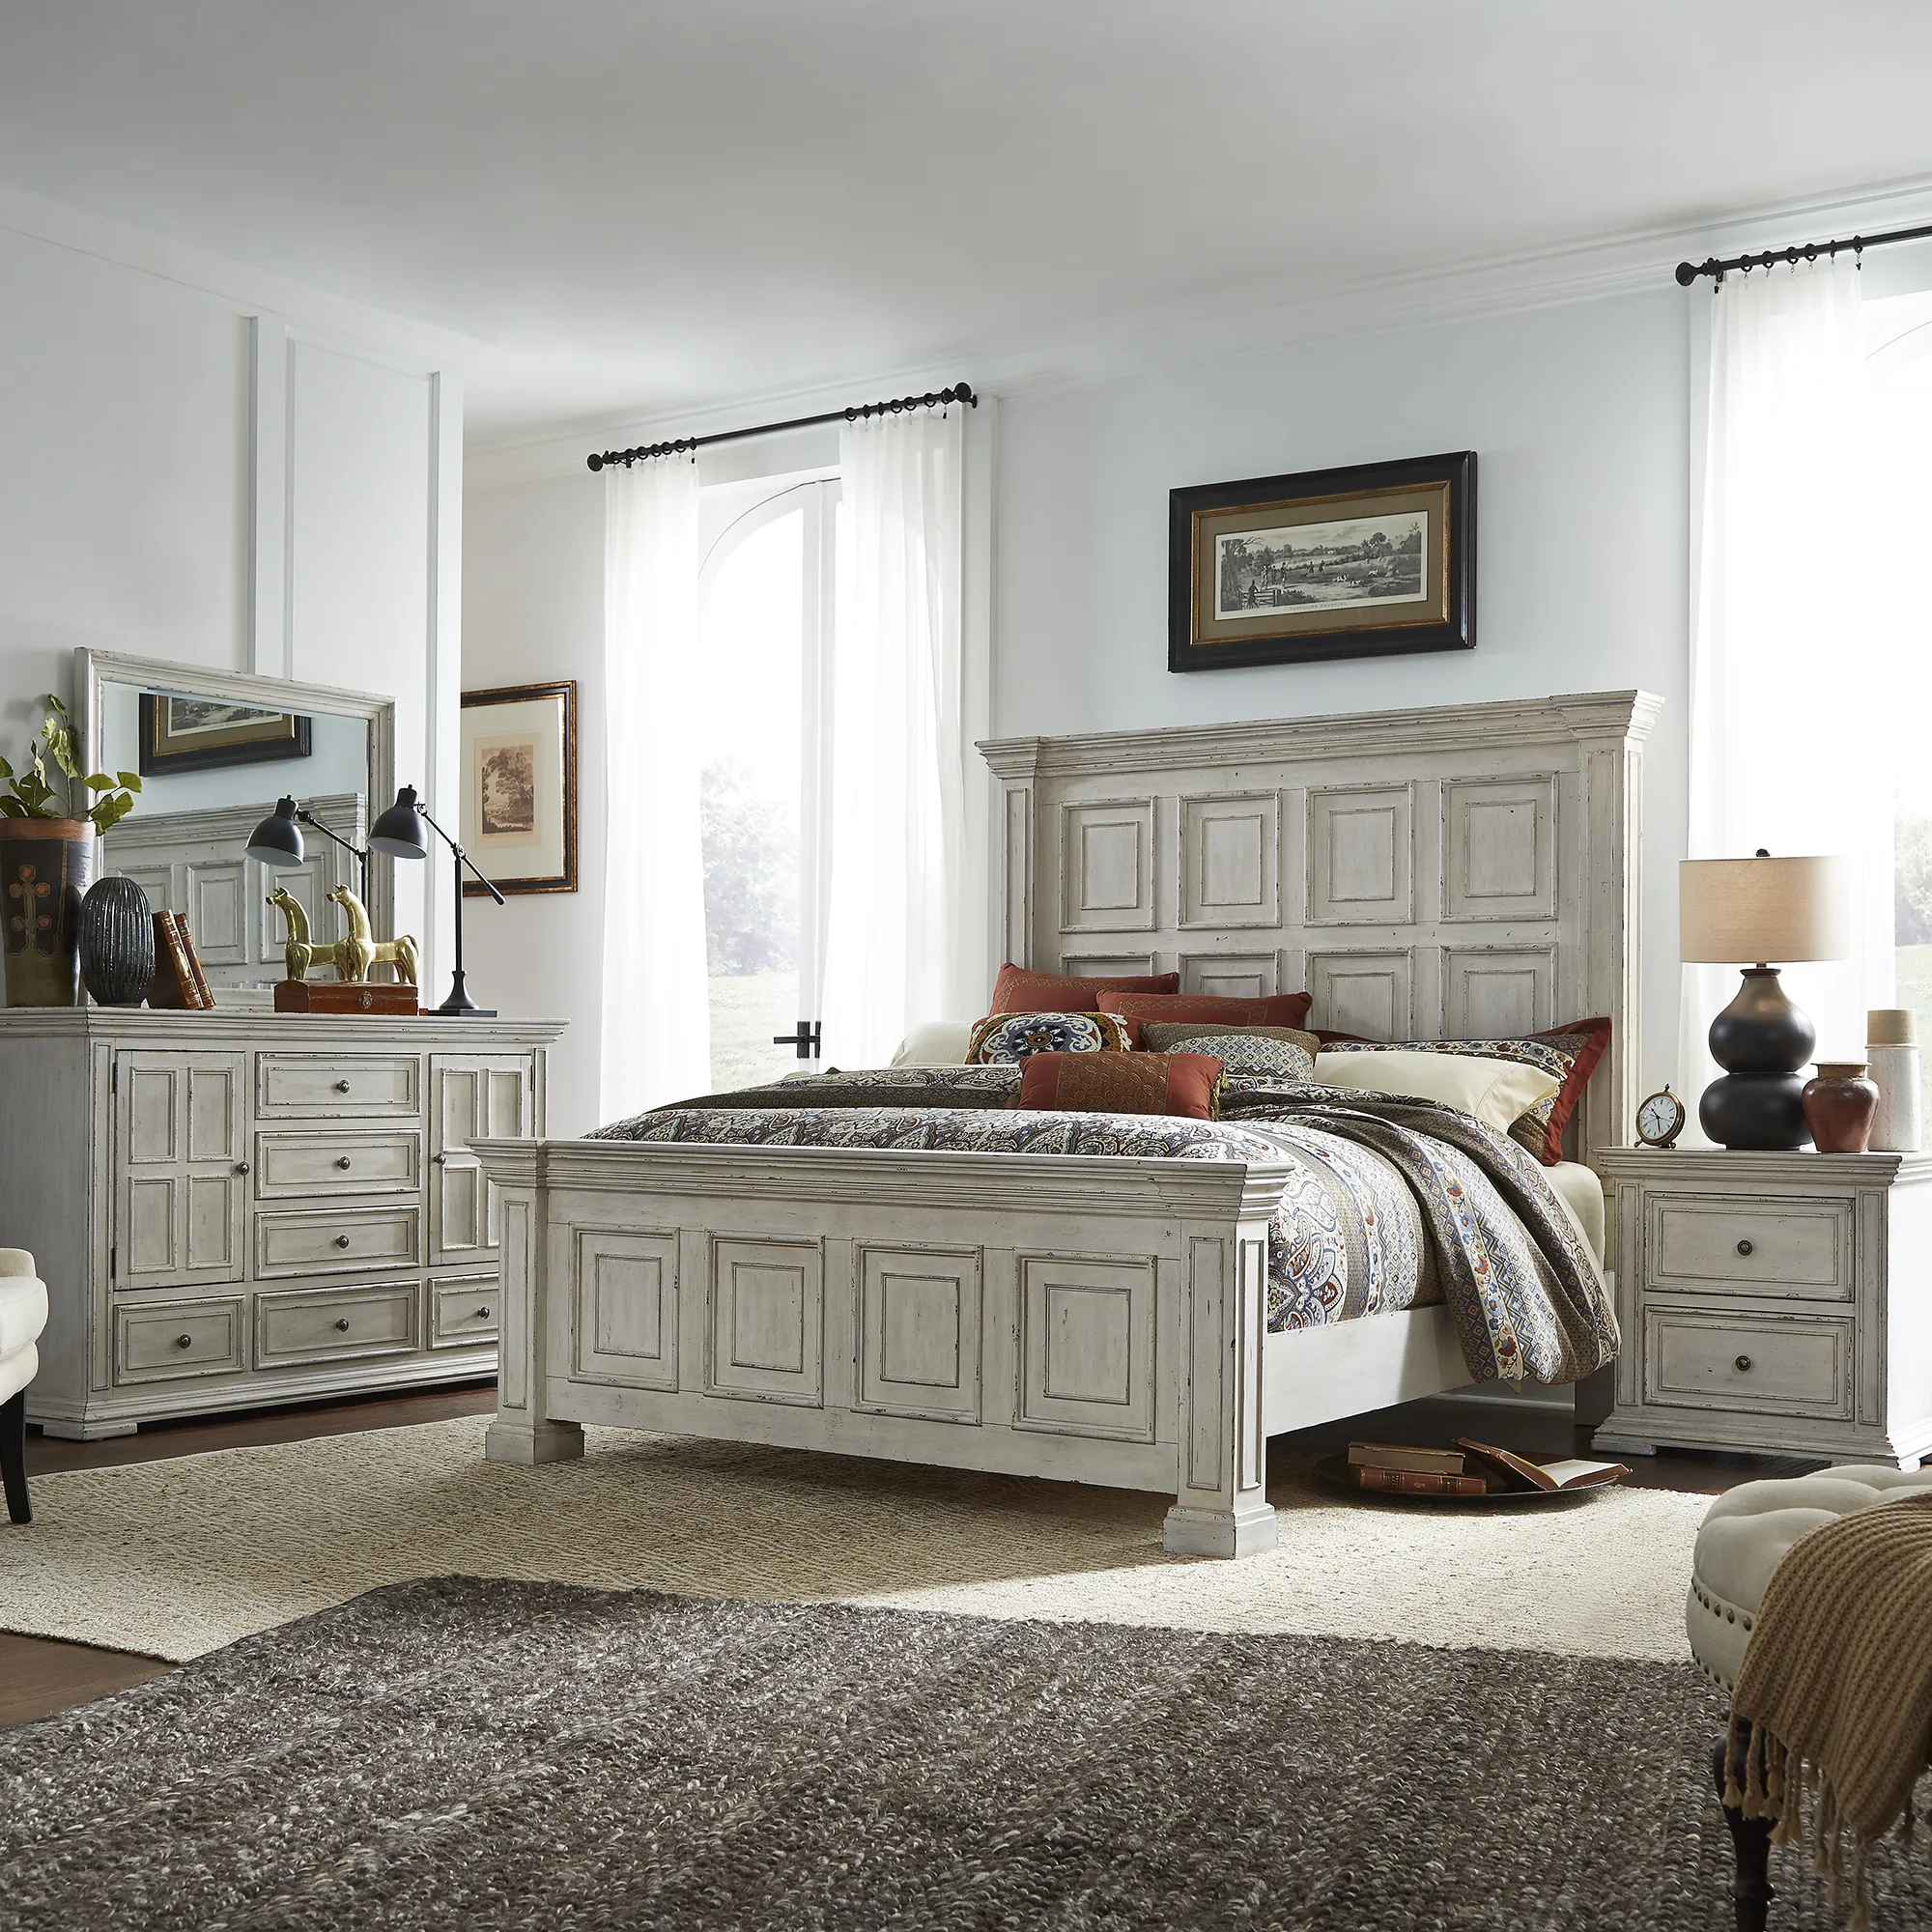 KING CALIFORNIA PANEL BED DRESSER & MIRROR NIGHT STAND - BIG VALLEY